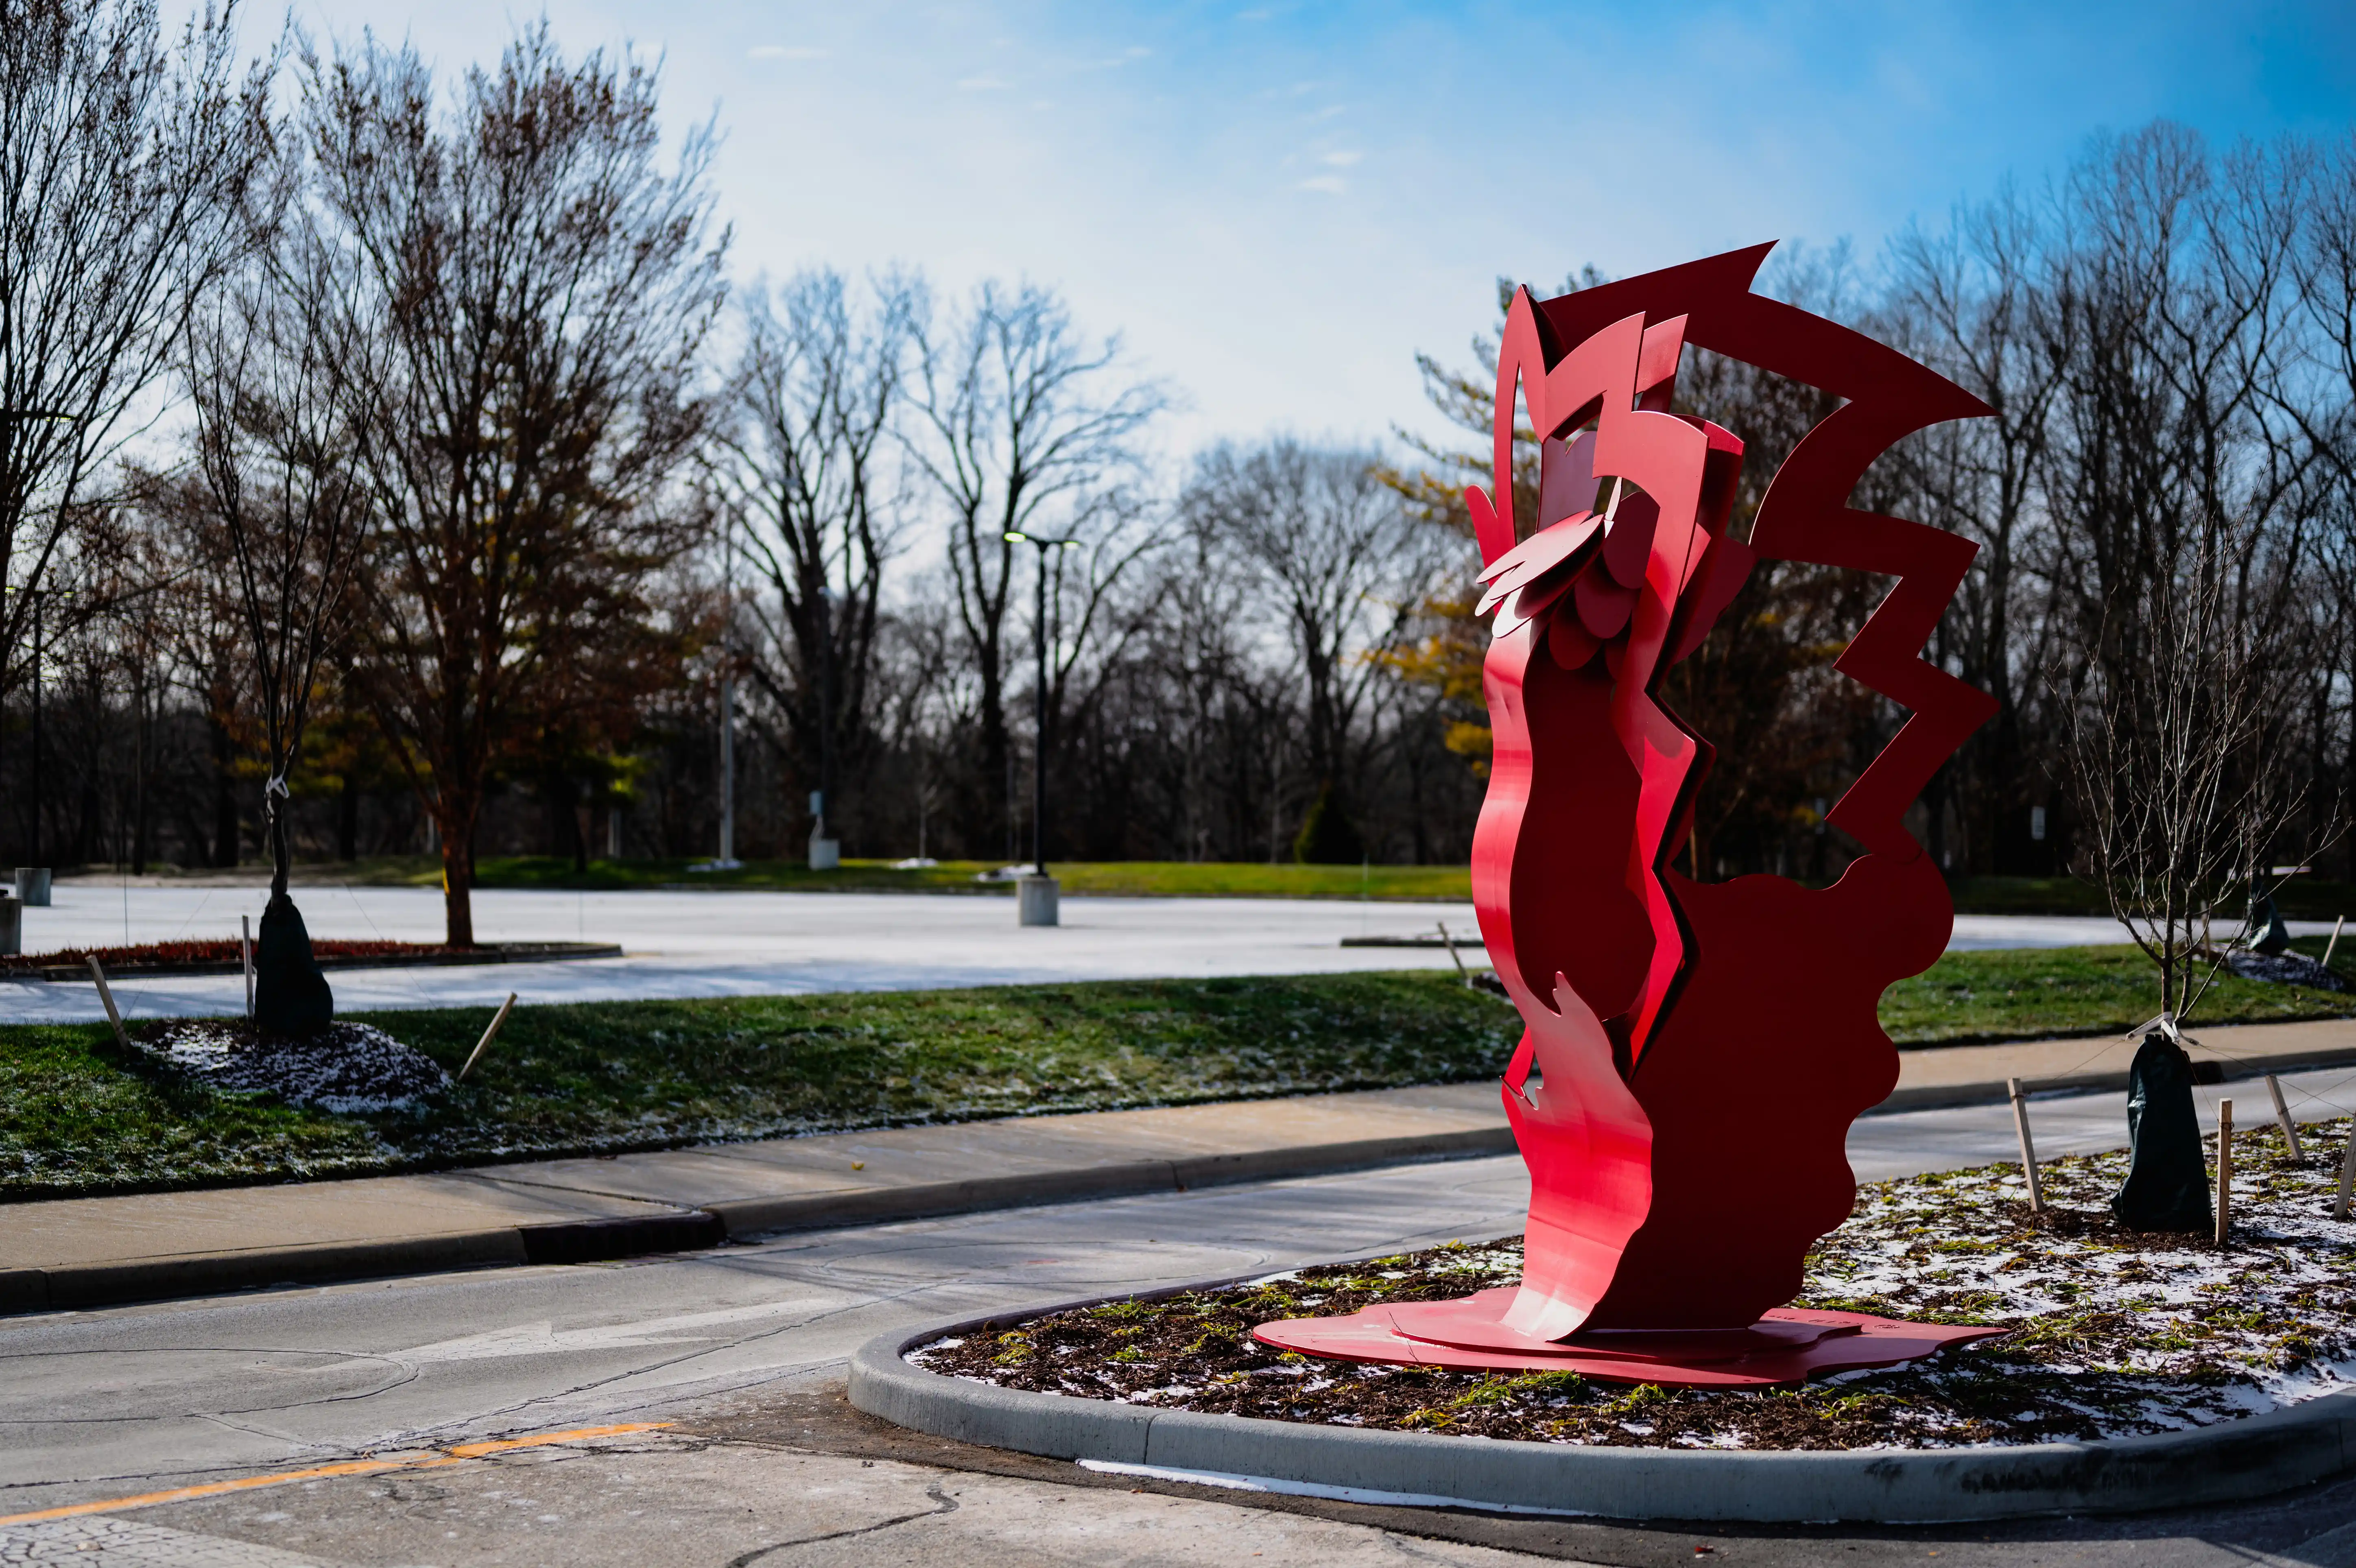 Abstract red sculpture in a park with bare trees and a clear blue sky in the background.